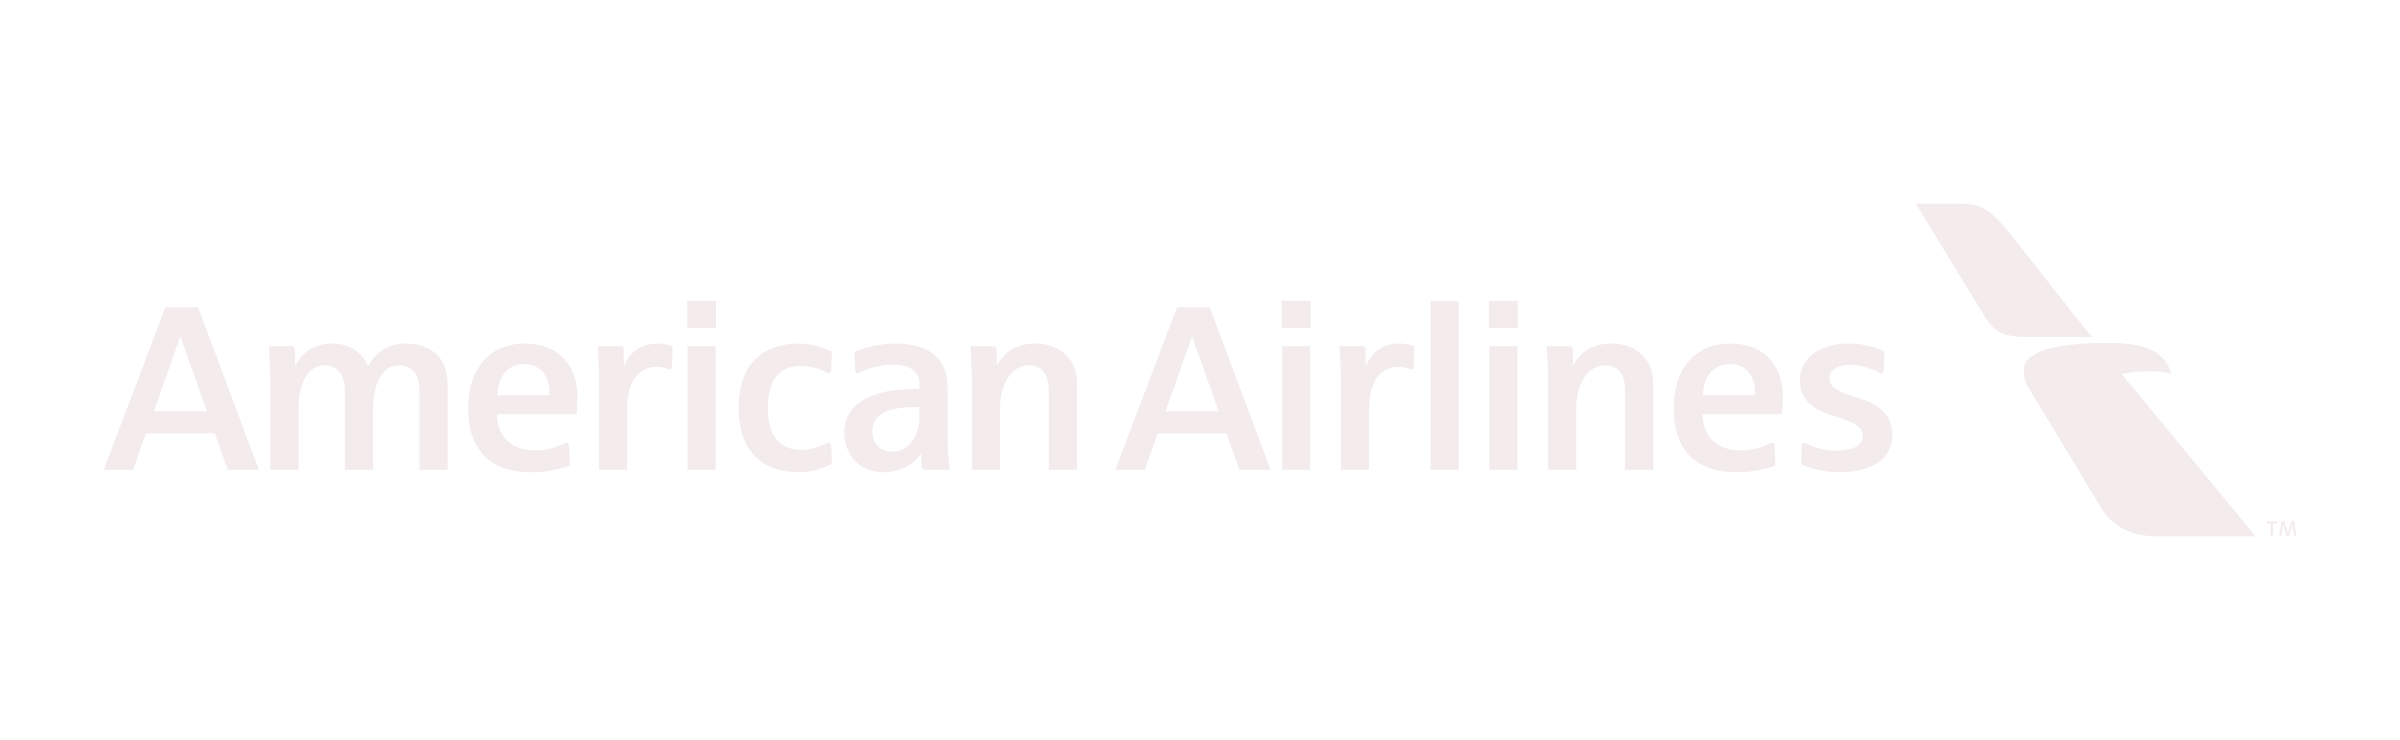 American Airlines logo